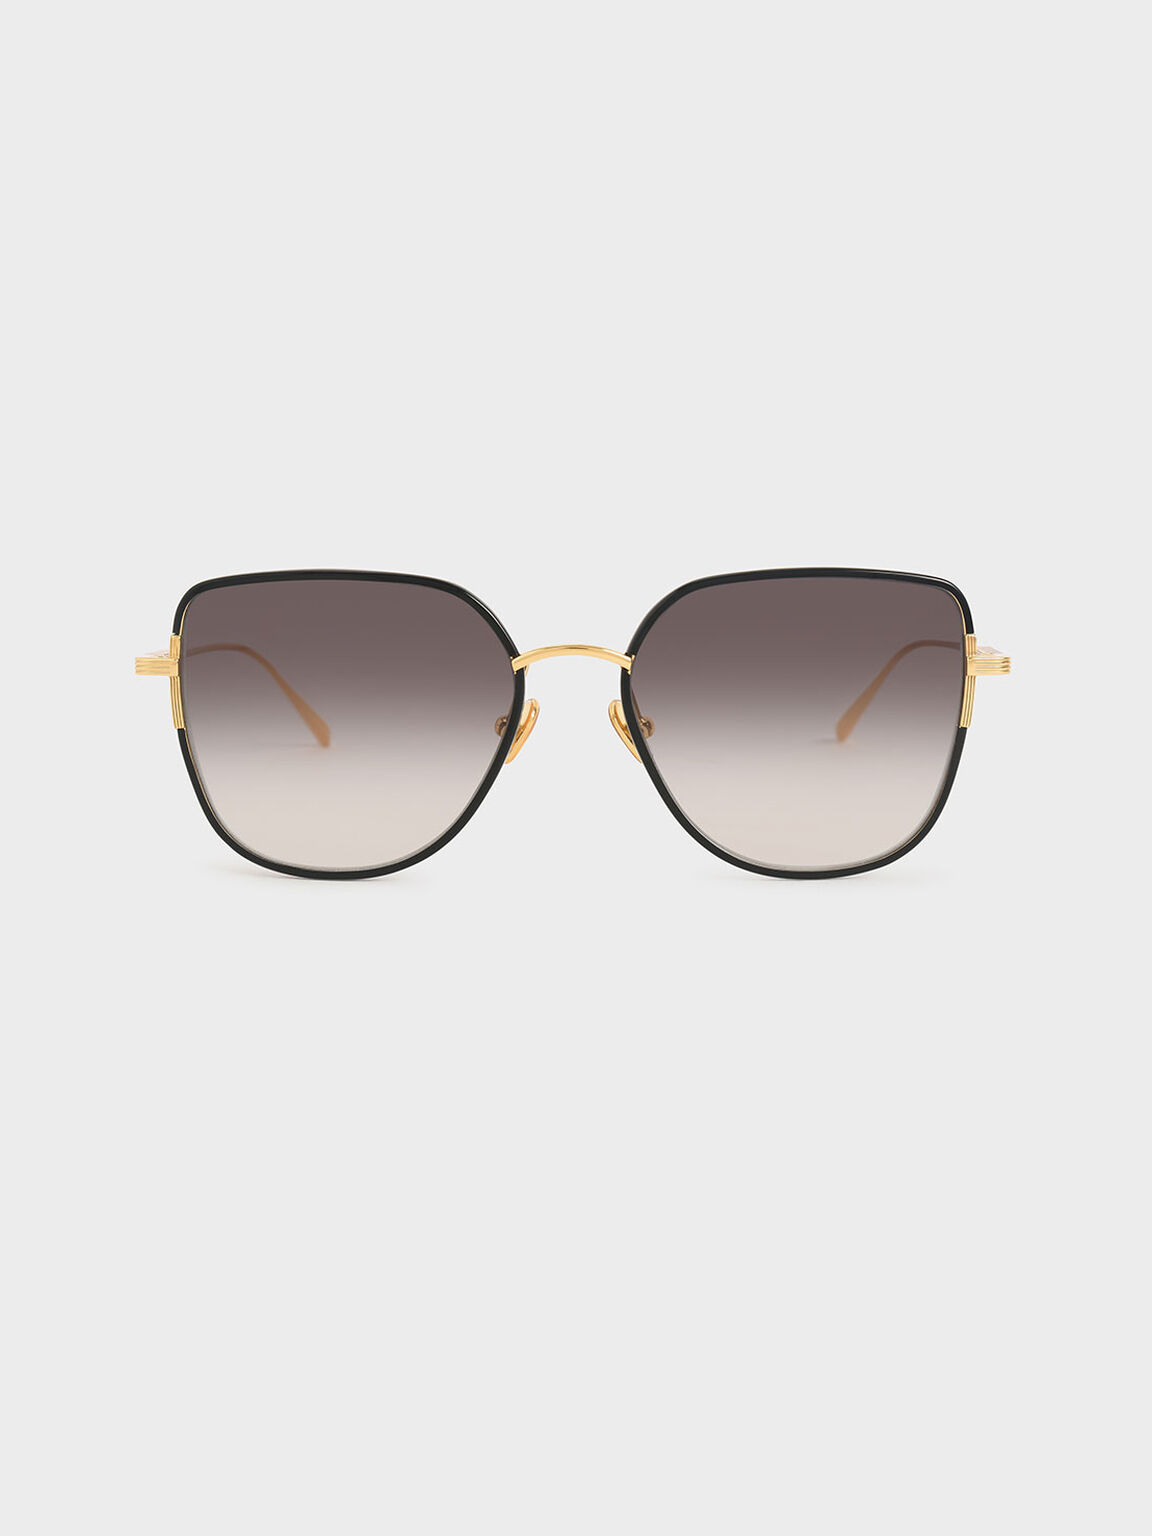 Black Panelled Temples Butterfly Sunglasses - CHARLES & KEITH US